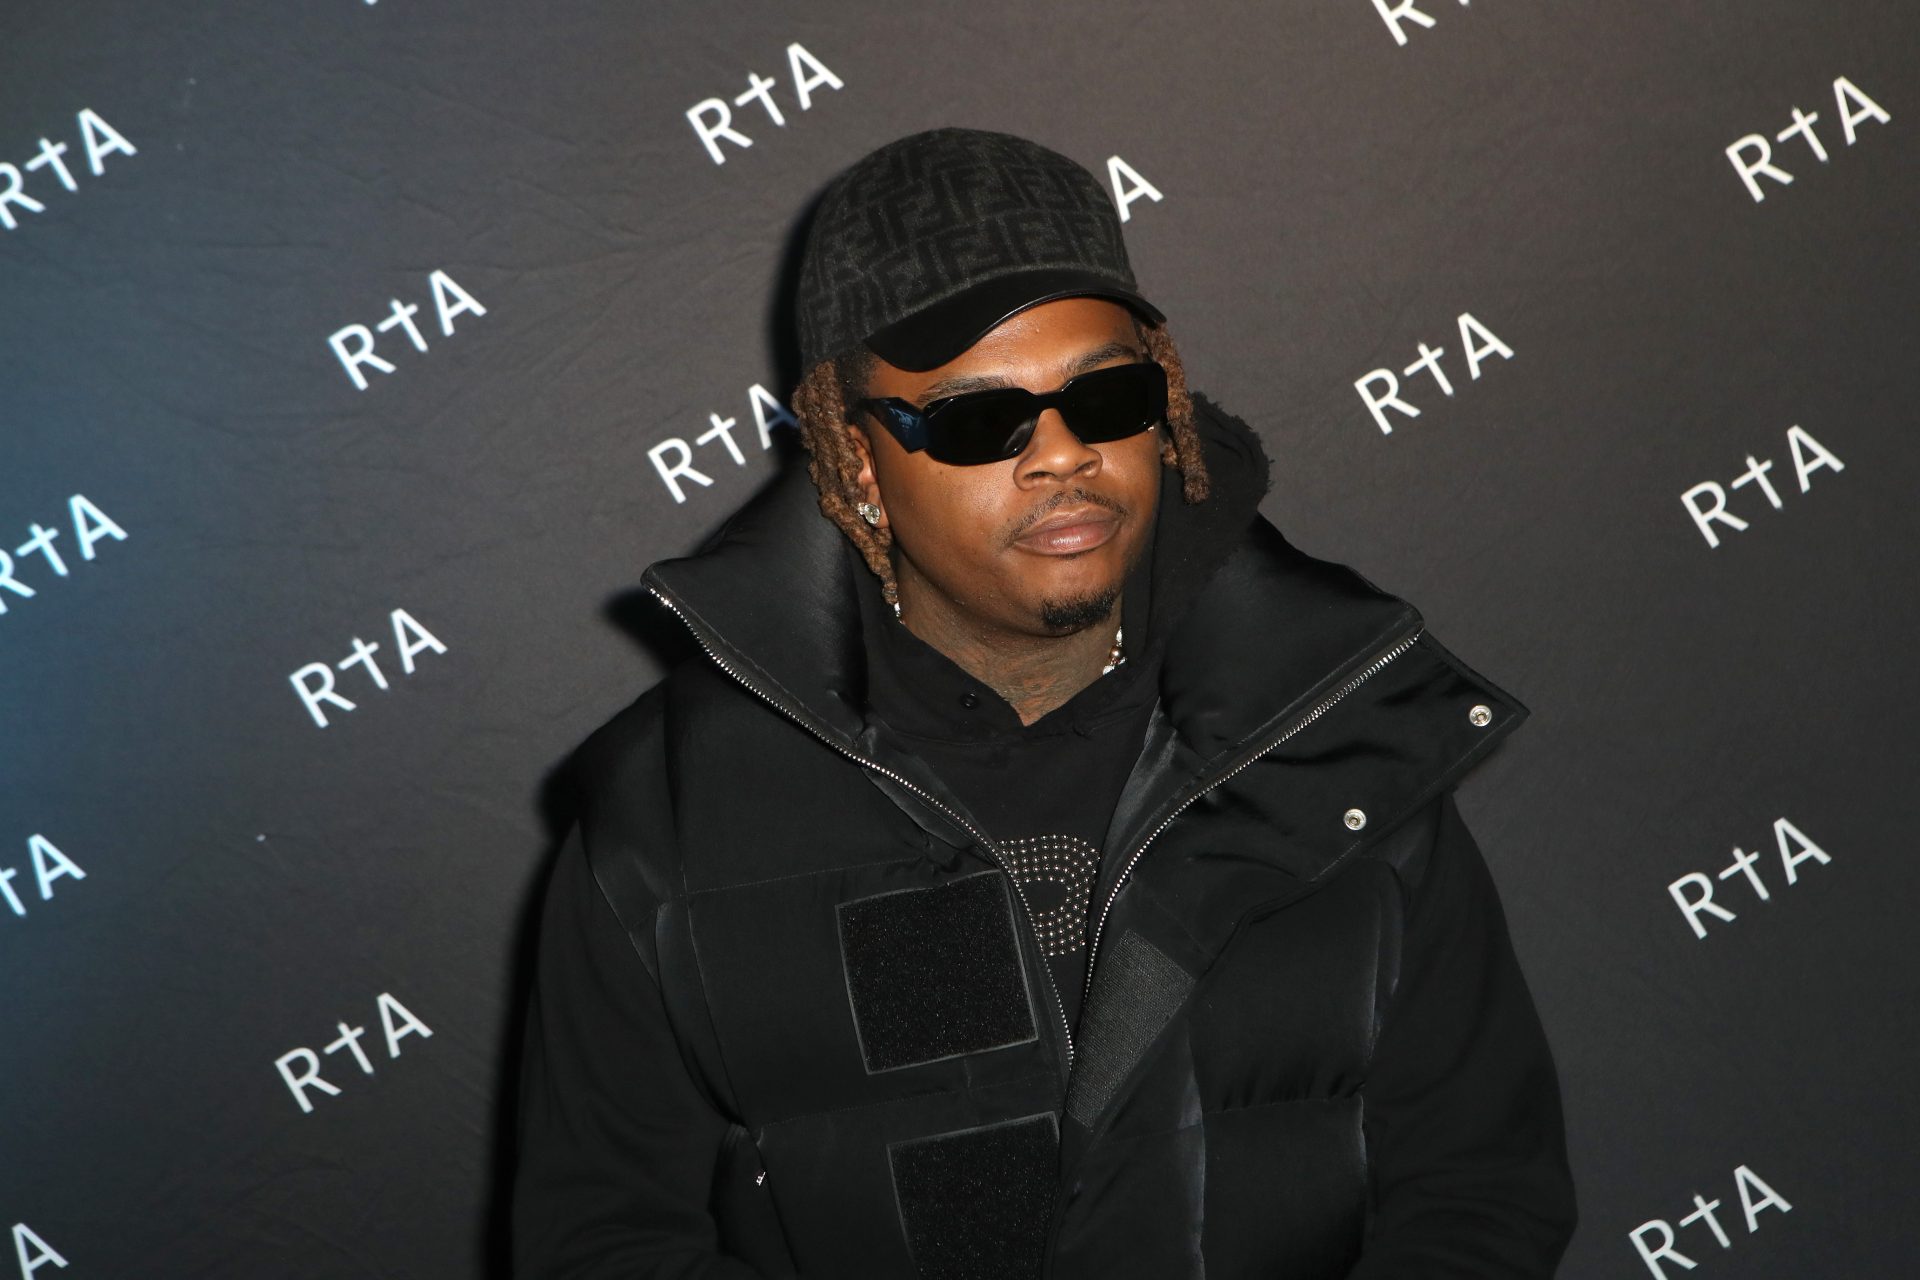 Gunna Declares His Innocence In Statement— "The Picture Being Painted Of Me Is Ugly And Untrue"